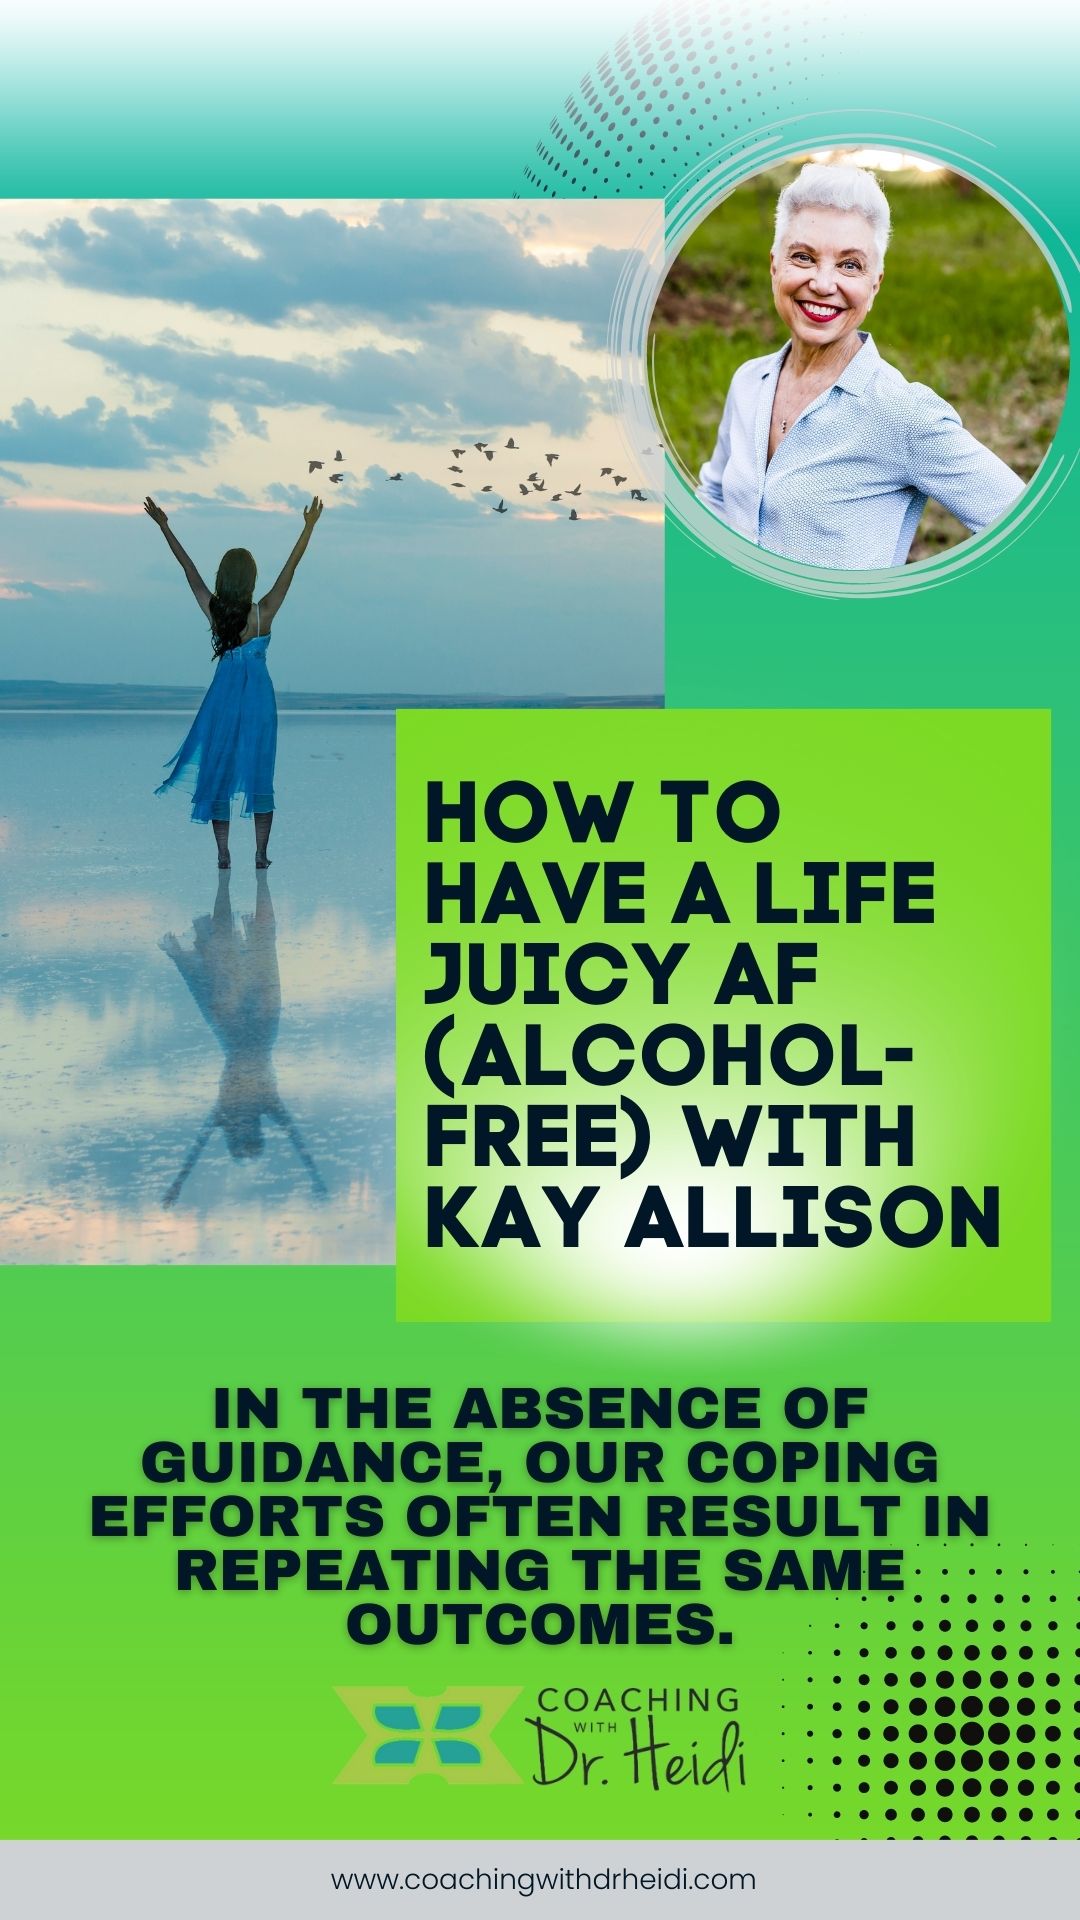 How-To-Have-A-Life-JUICY-AF-Alcohol-Free-With-Kay-Allison-BLOG